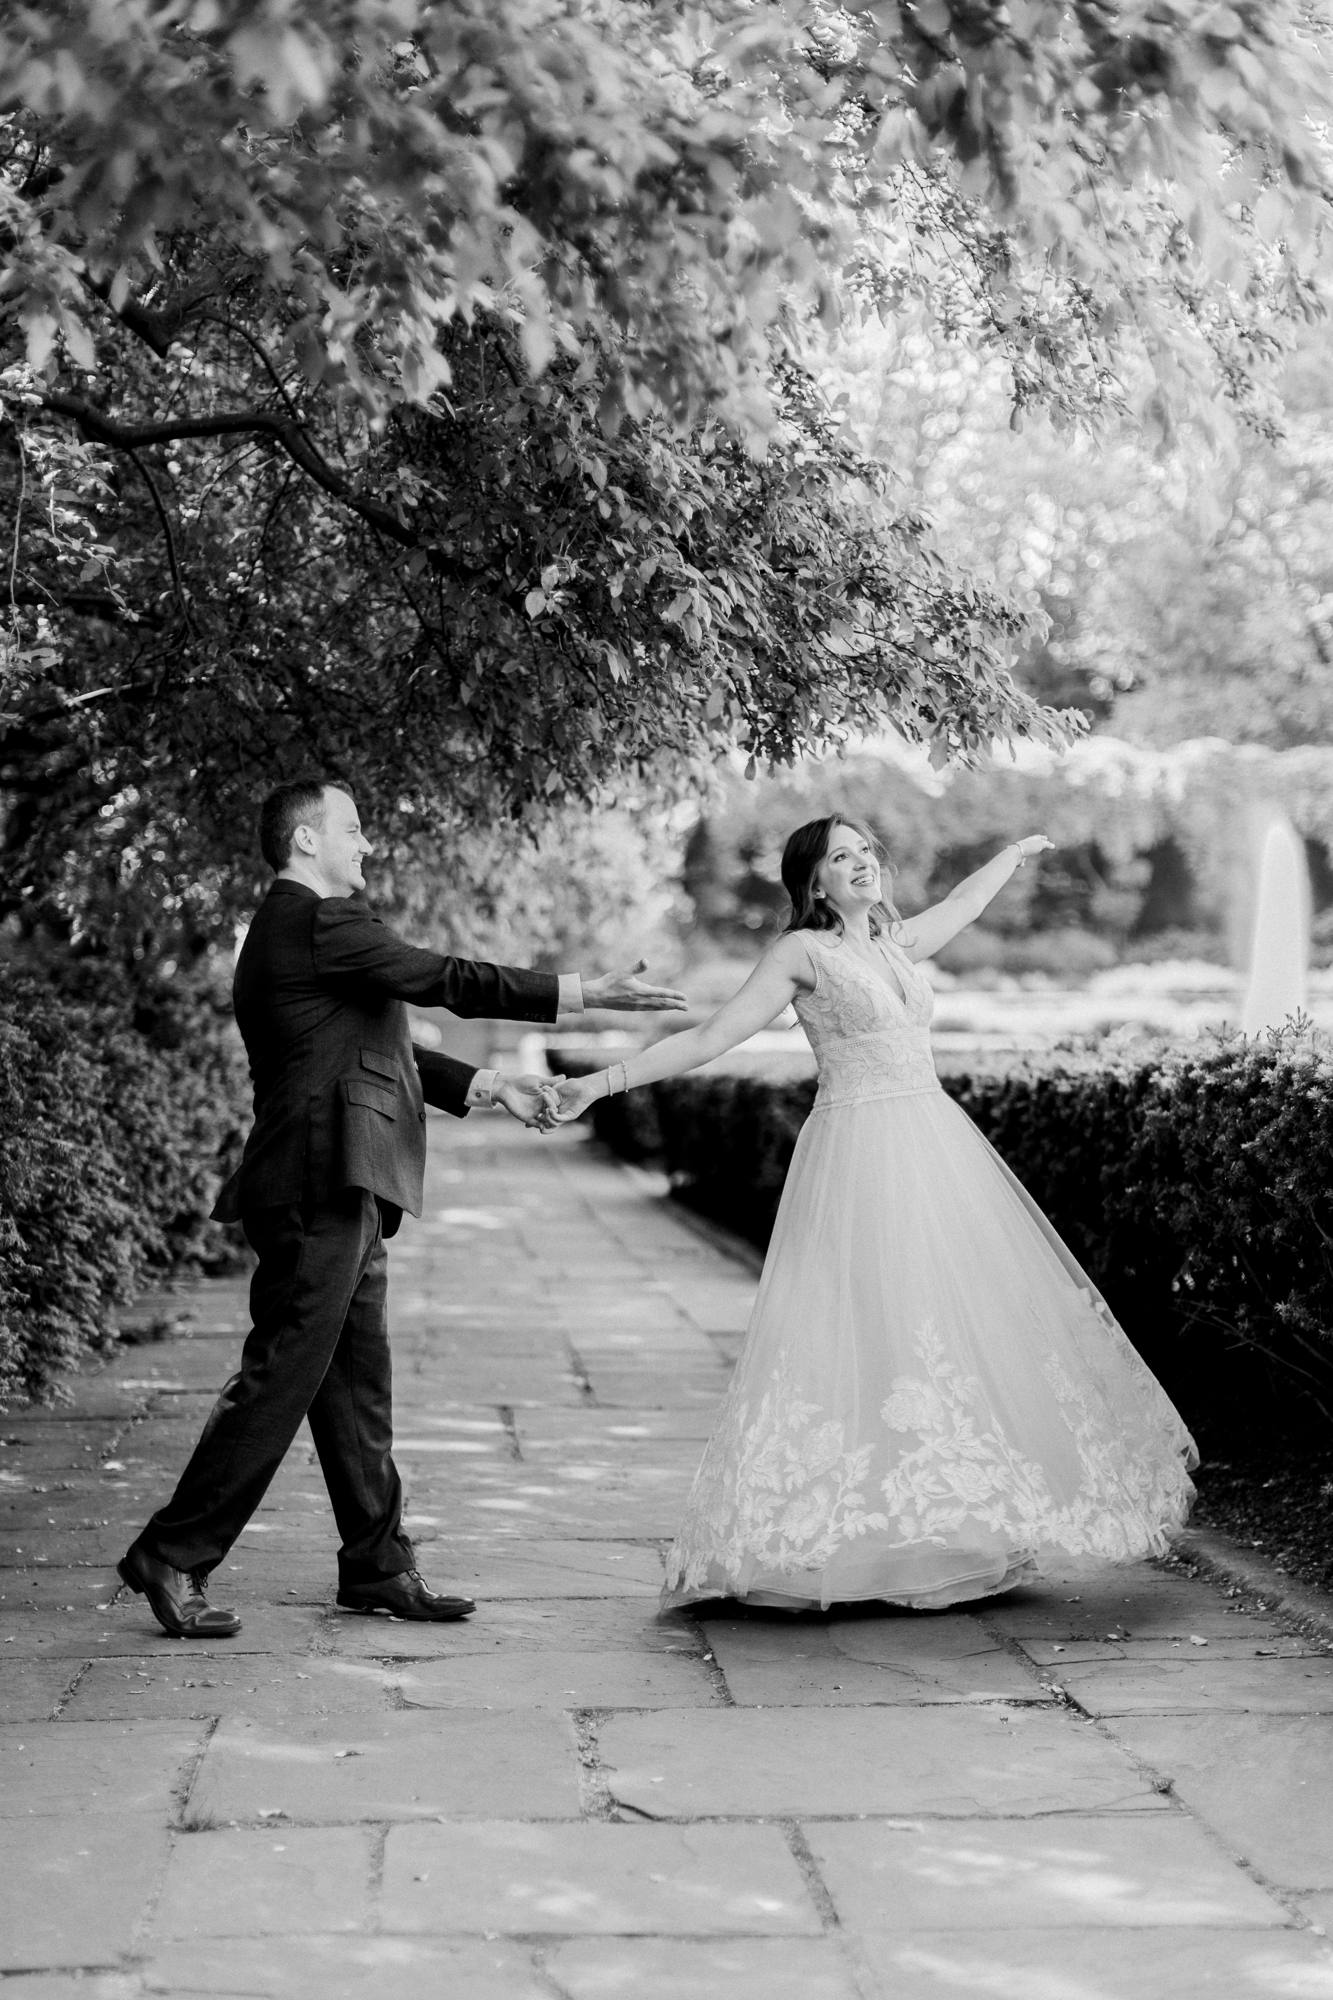 Playful Summer Wedding Photos at the Conservatory Garden in Central Park New York